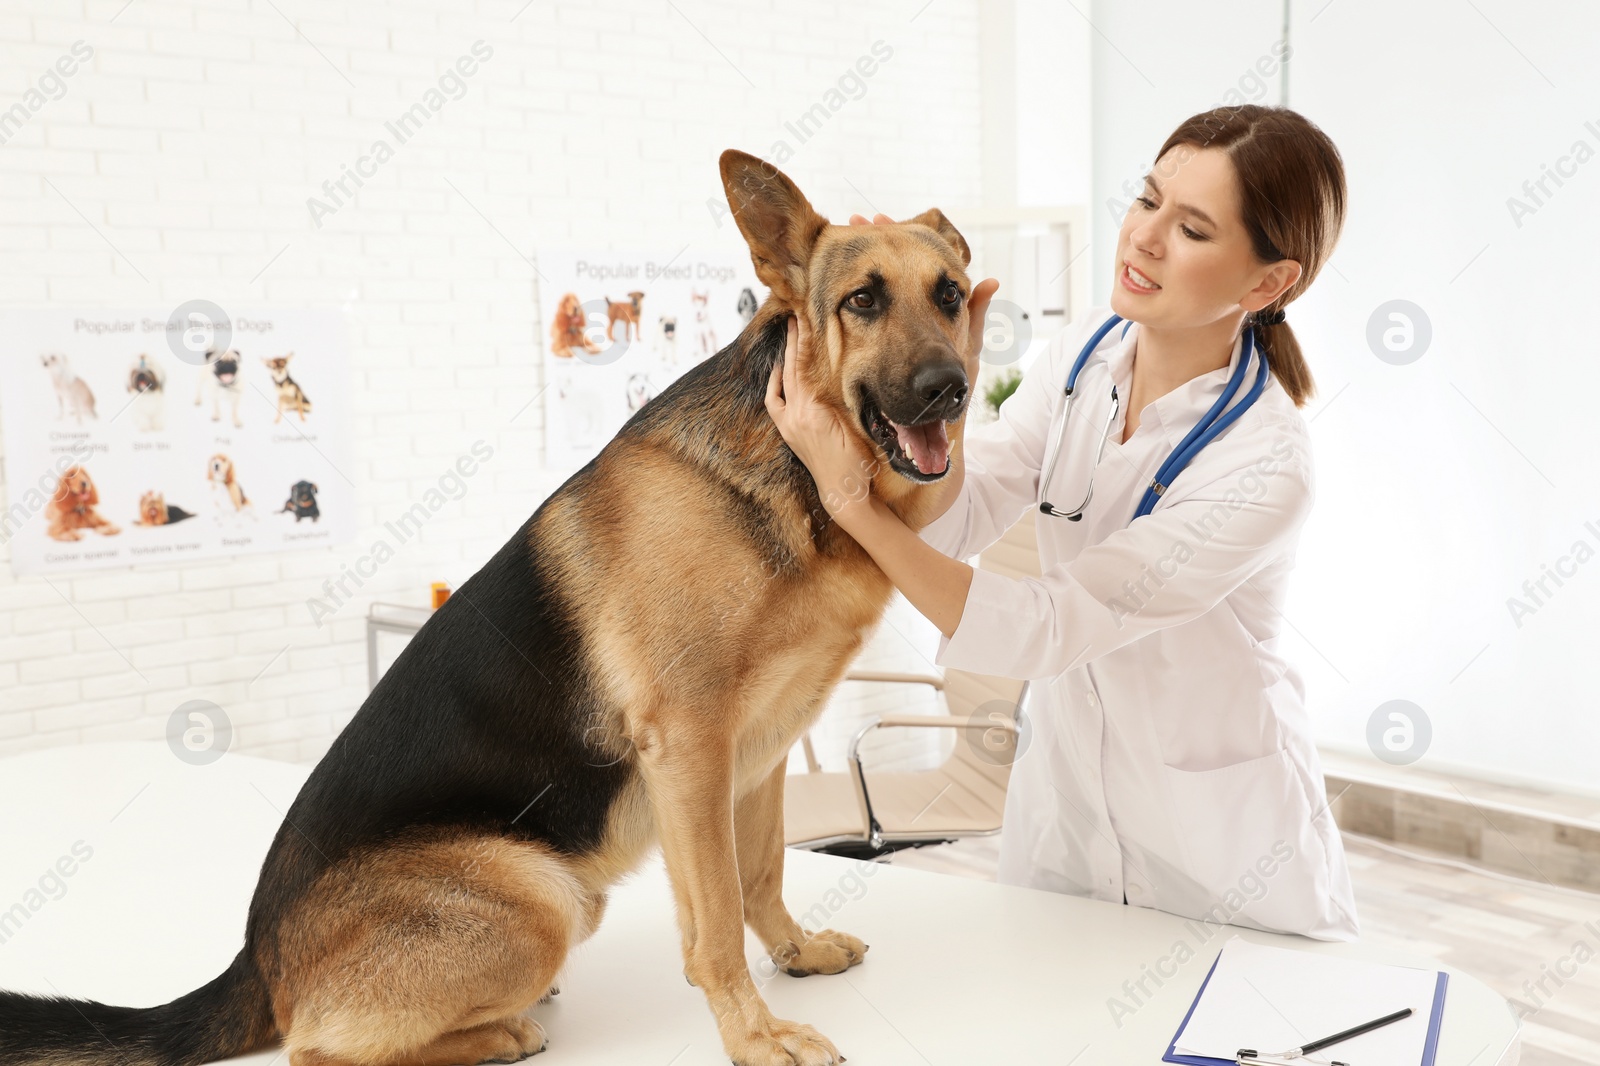 Photo of Professional veterinarian examining dog's ears in clinic